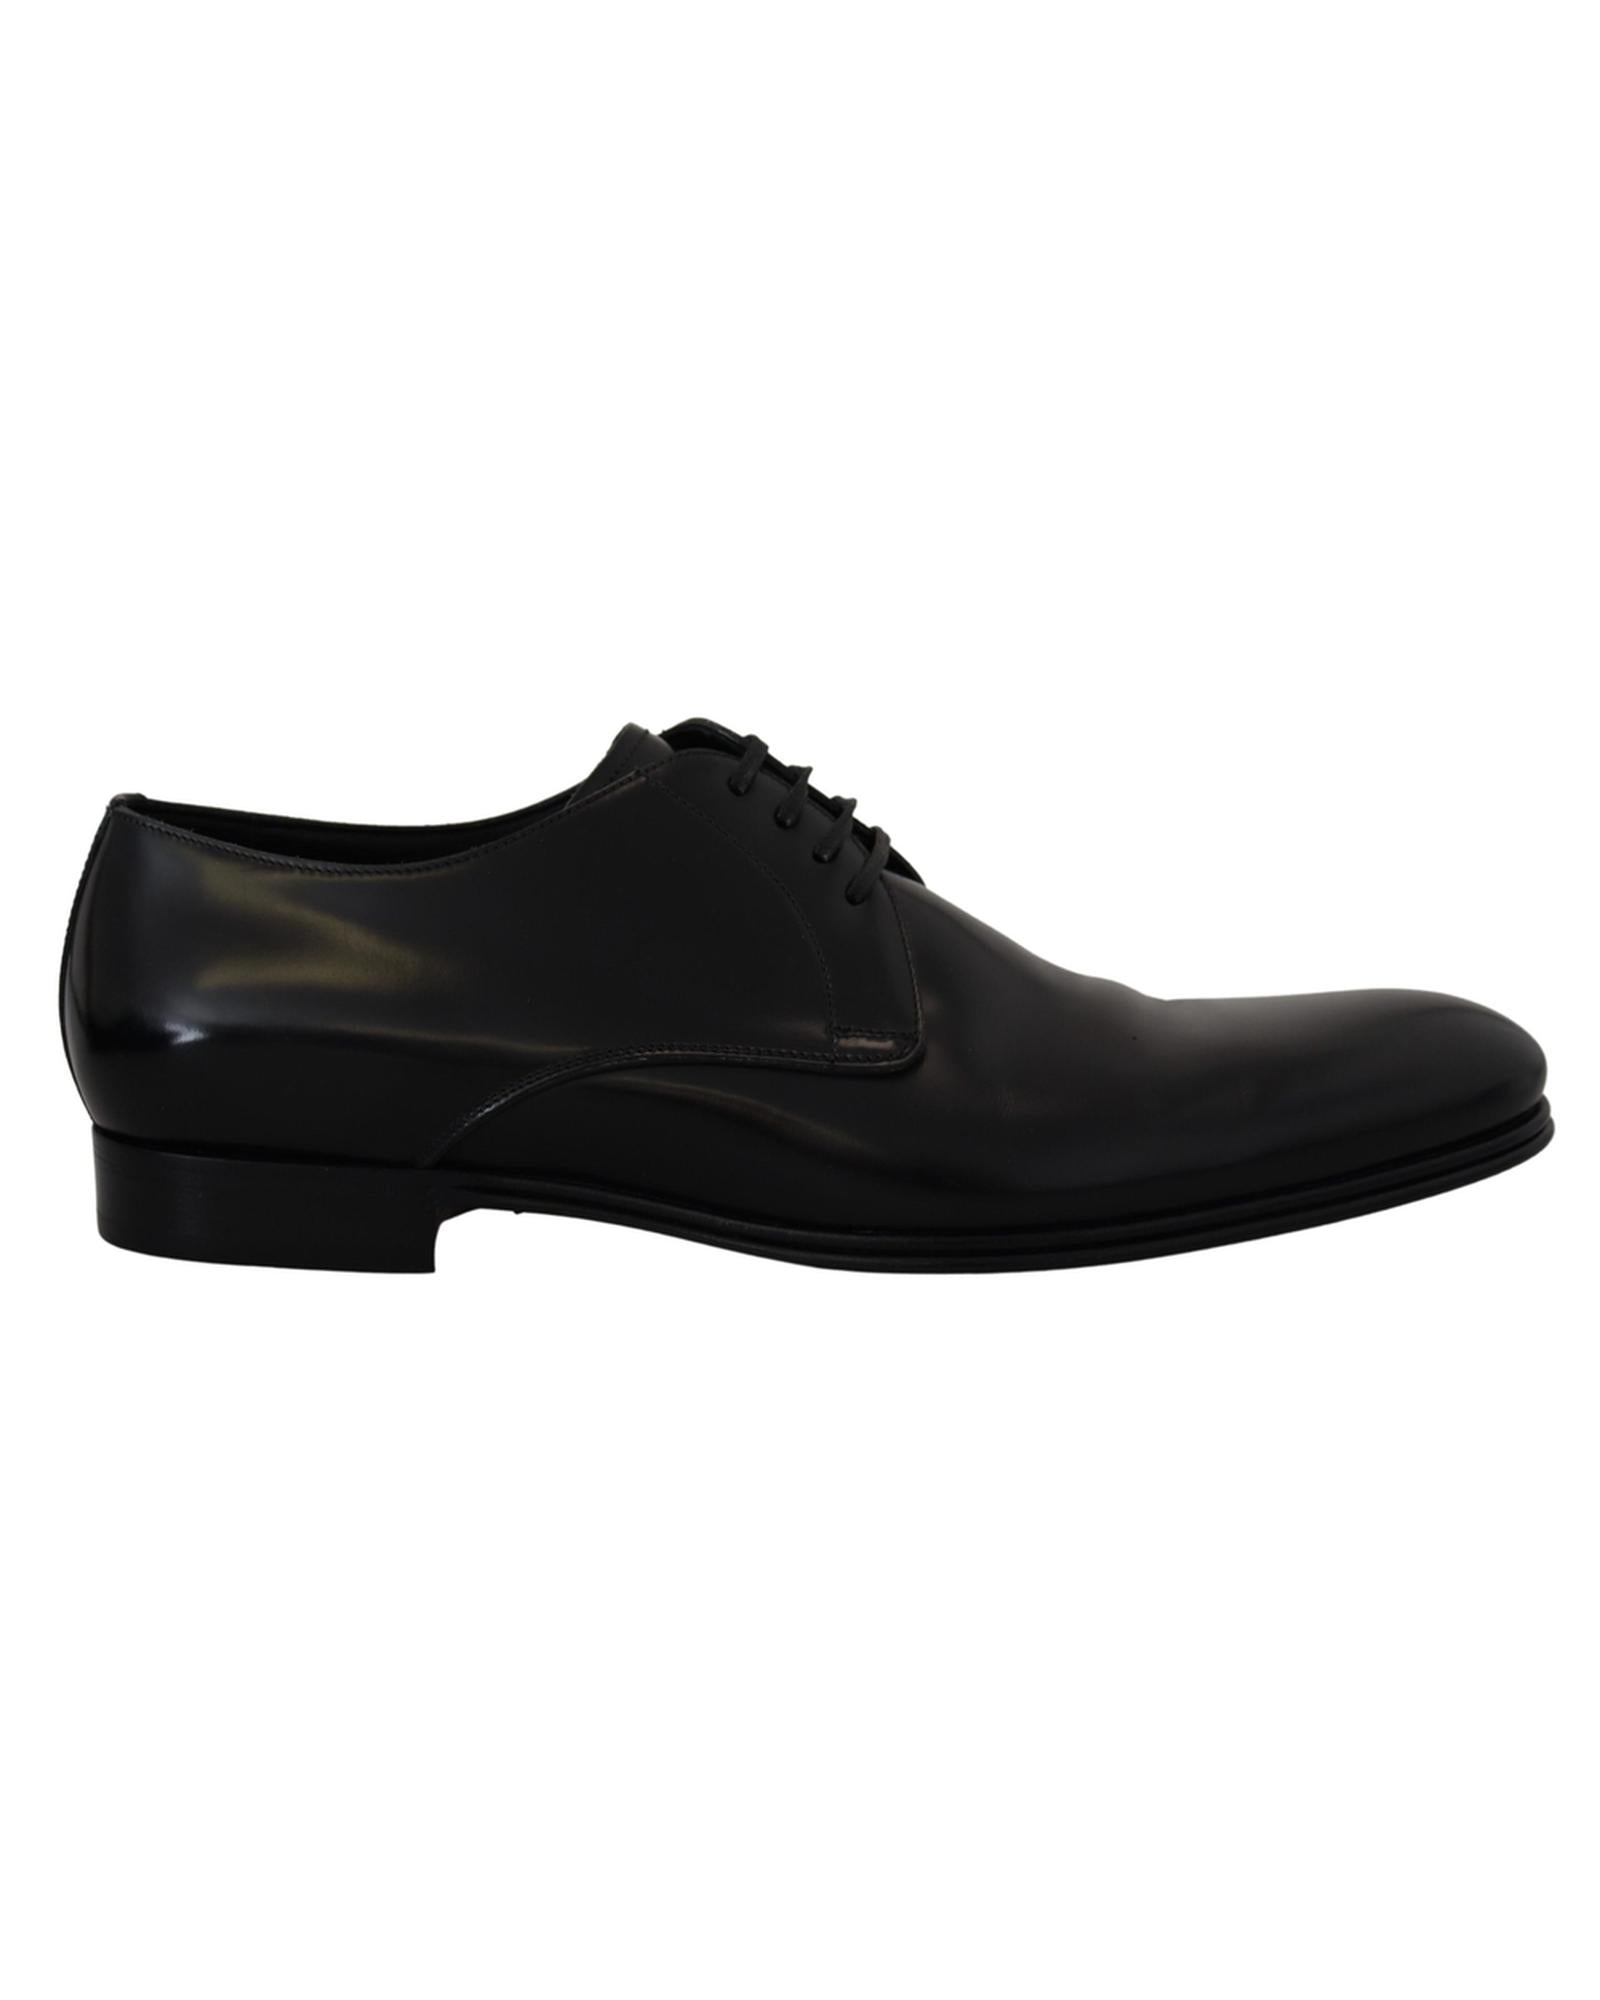 Derby Dress Formal Shoes with Leather Sole and Logo Details 42.5 EU Men